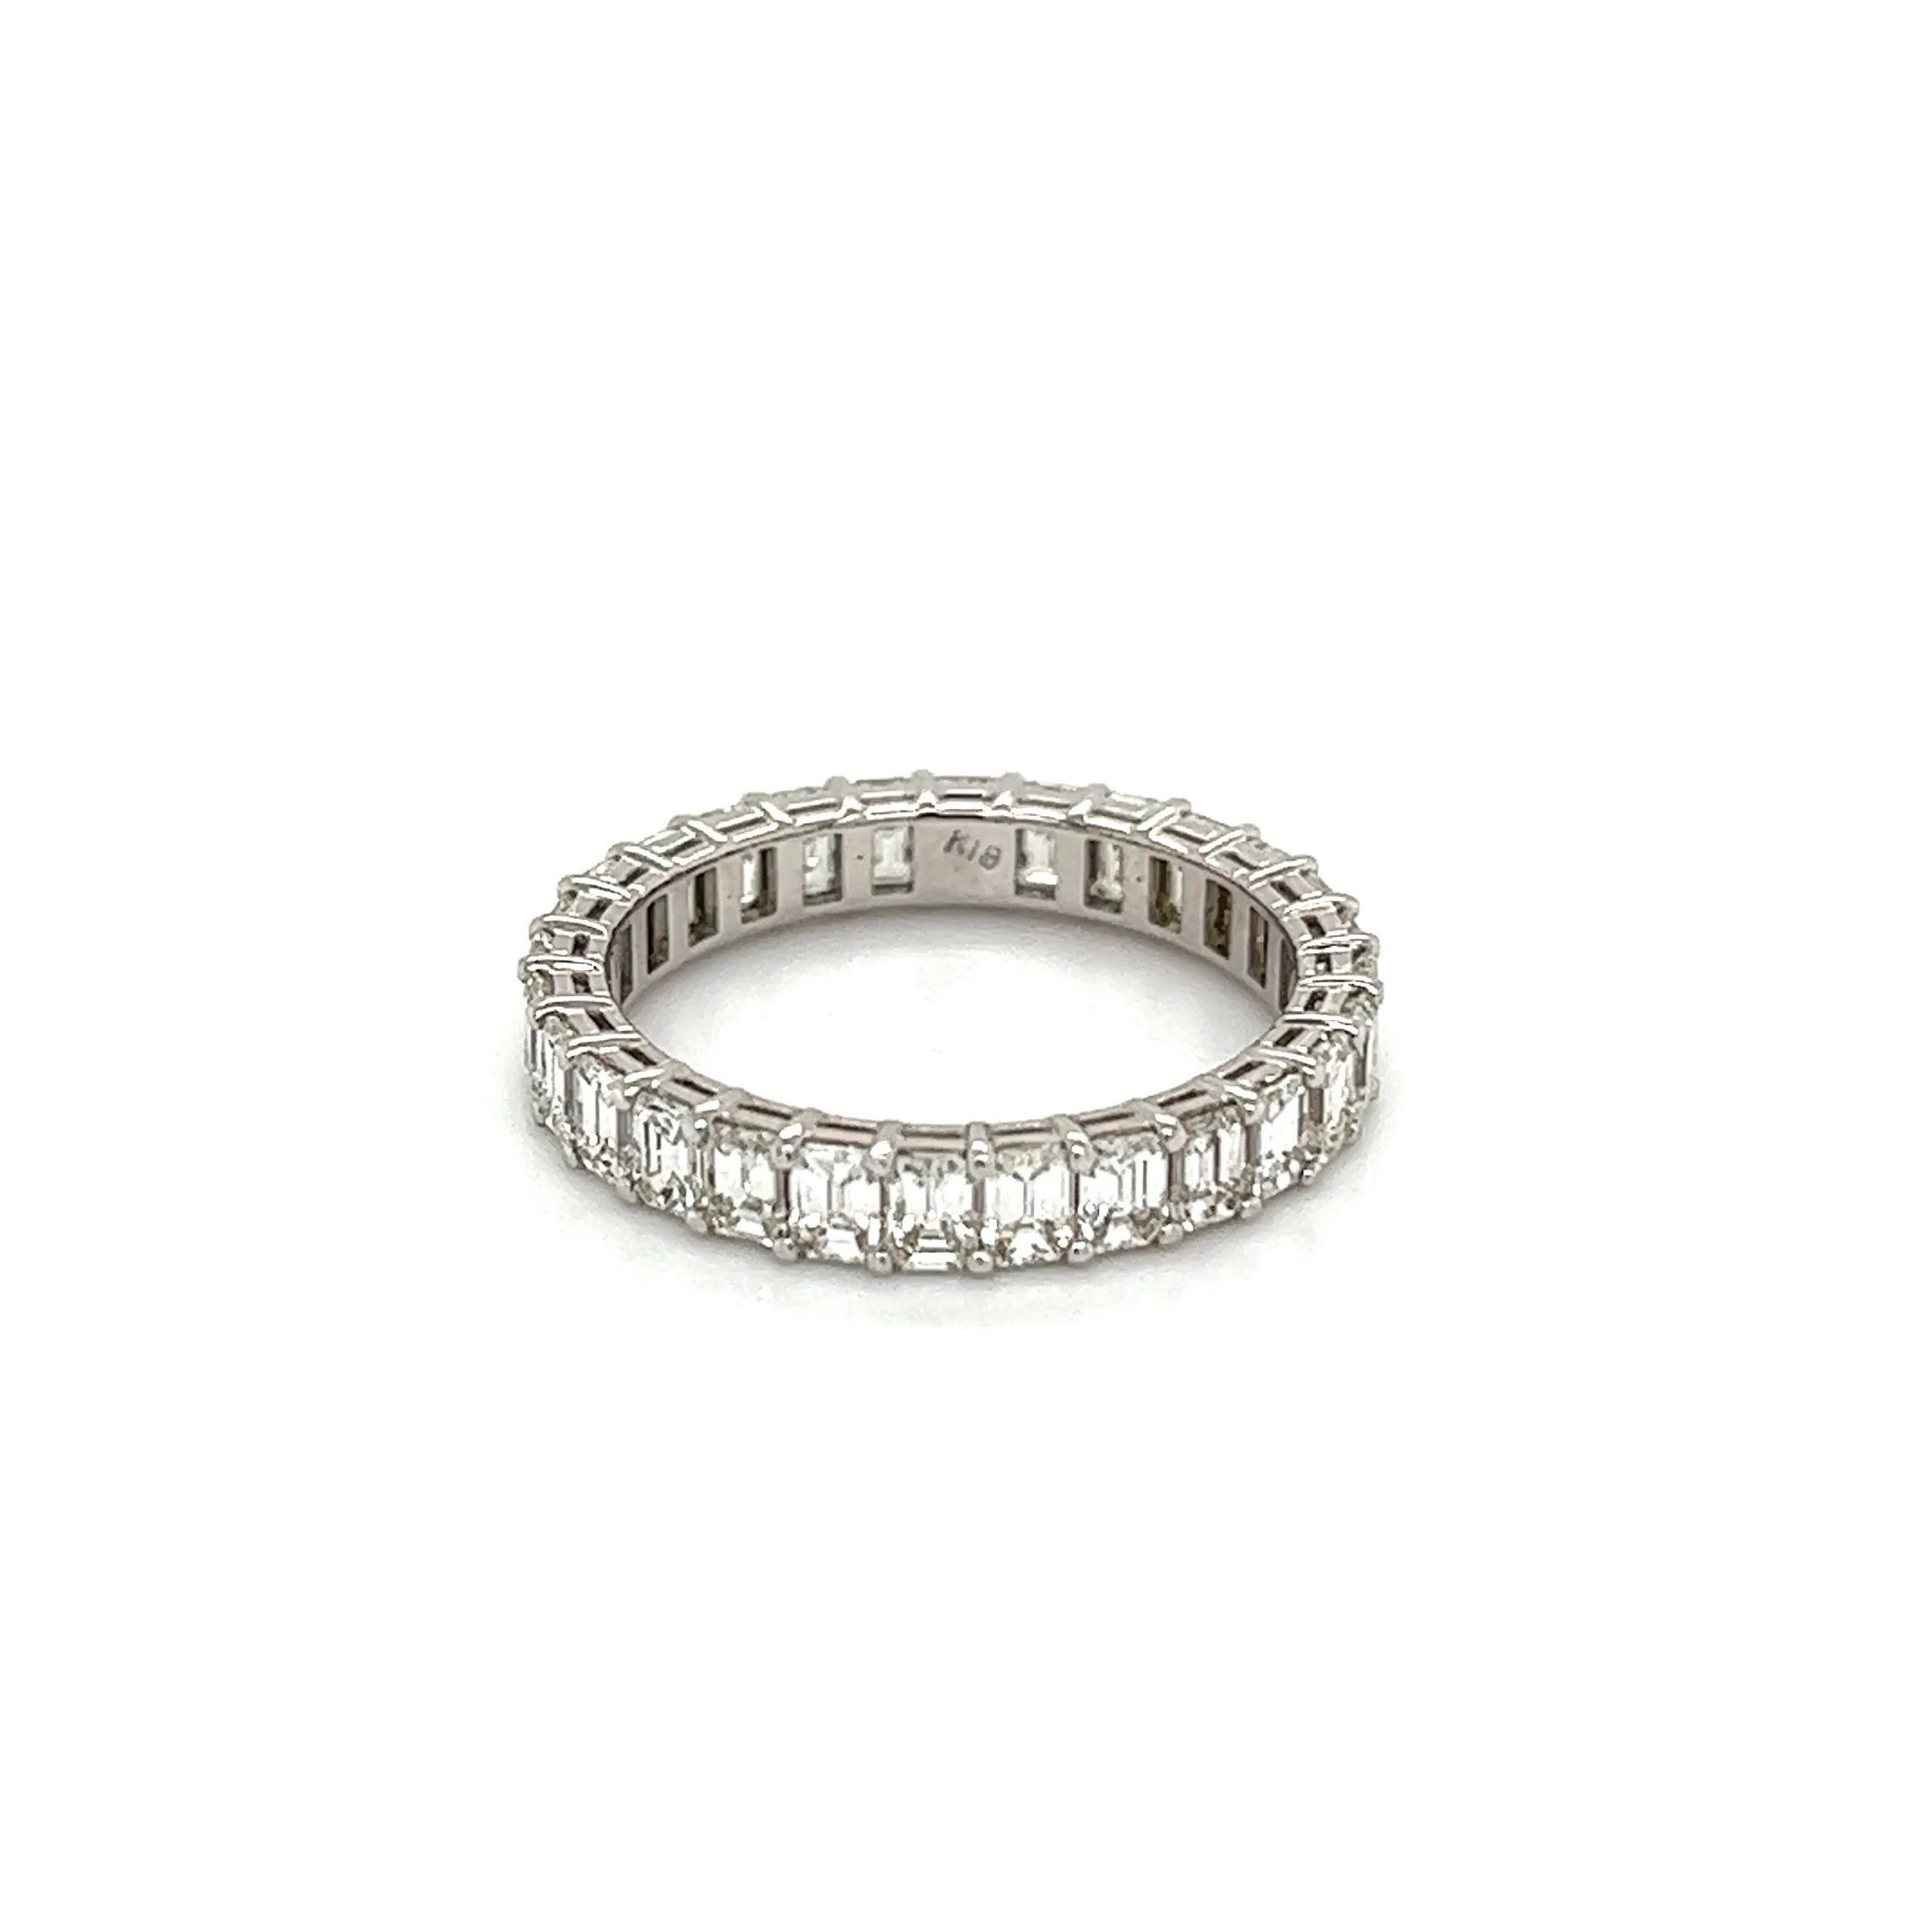 Simply Beautiful! Finely detailed Diamond Eternity Gold Band Ring. Hand set with securely nestled 28 Emerald Cut Diamonds, weighing approx. 2.70tcw; G-VS Quality. Hand crafted 18K White Gold mounting. Ideal worn alone or as an alternative Engagement